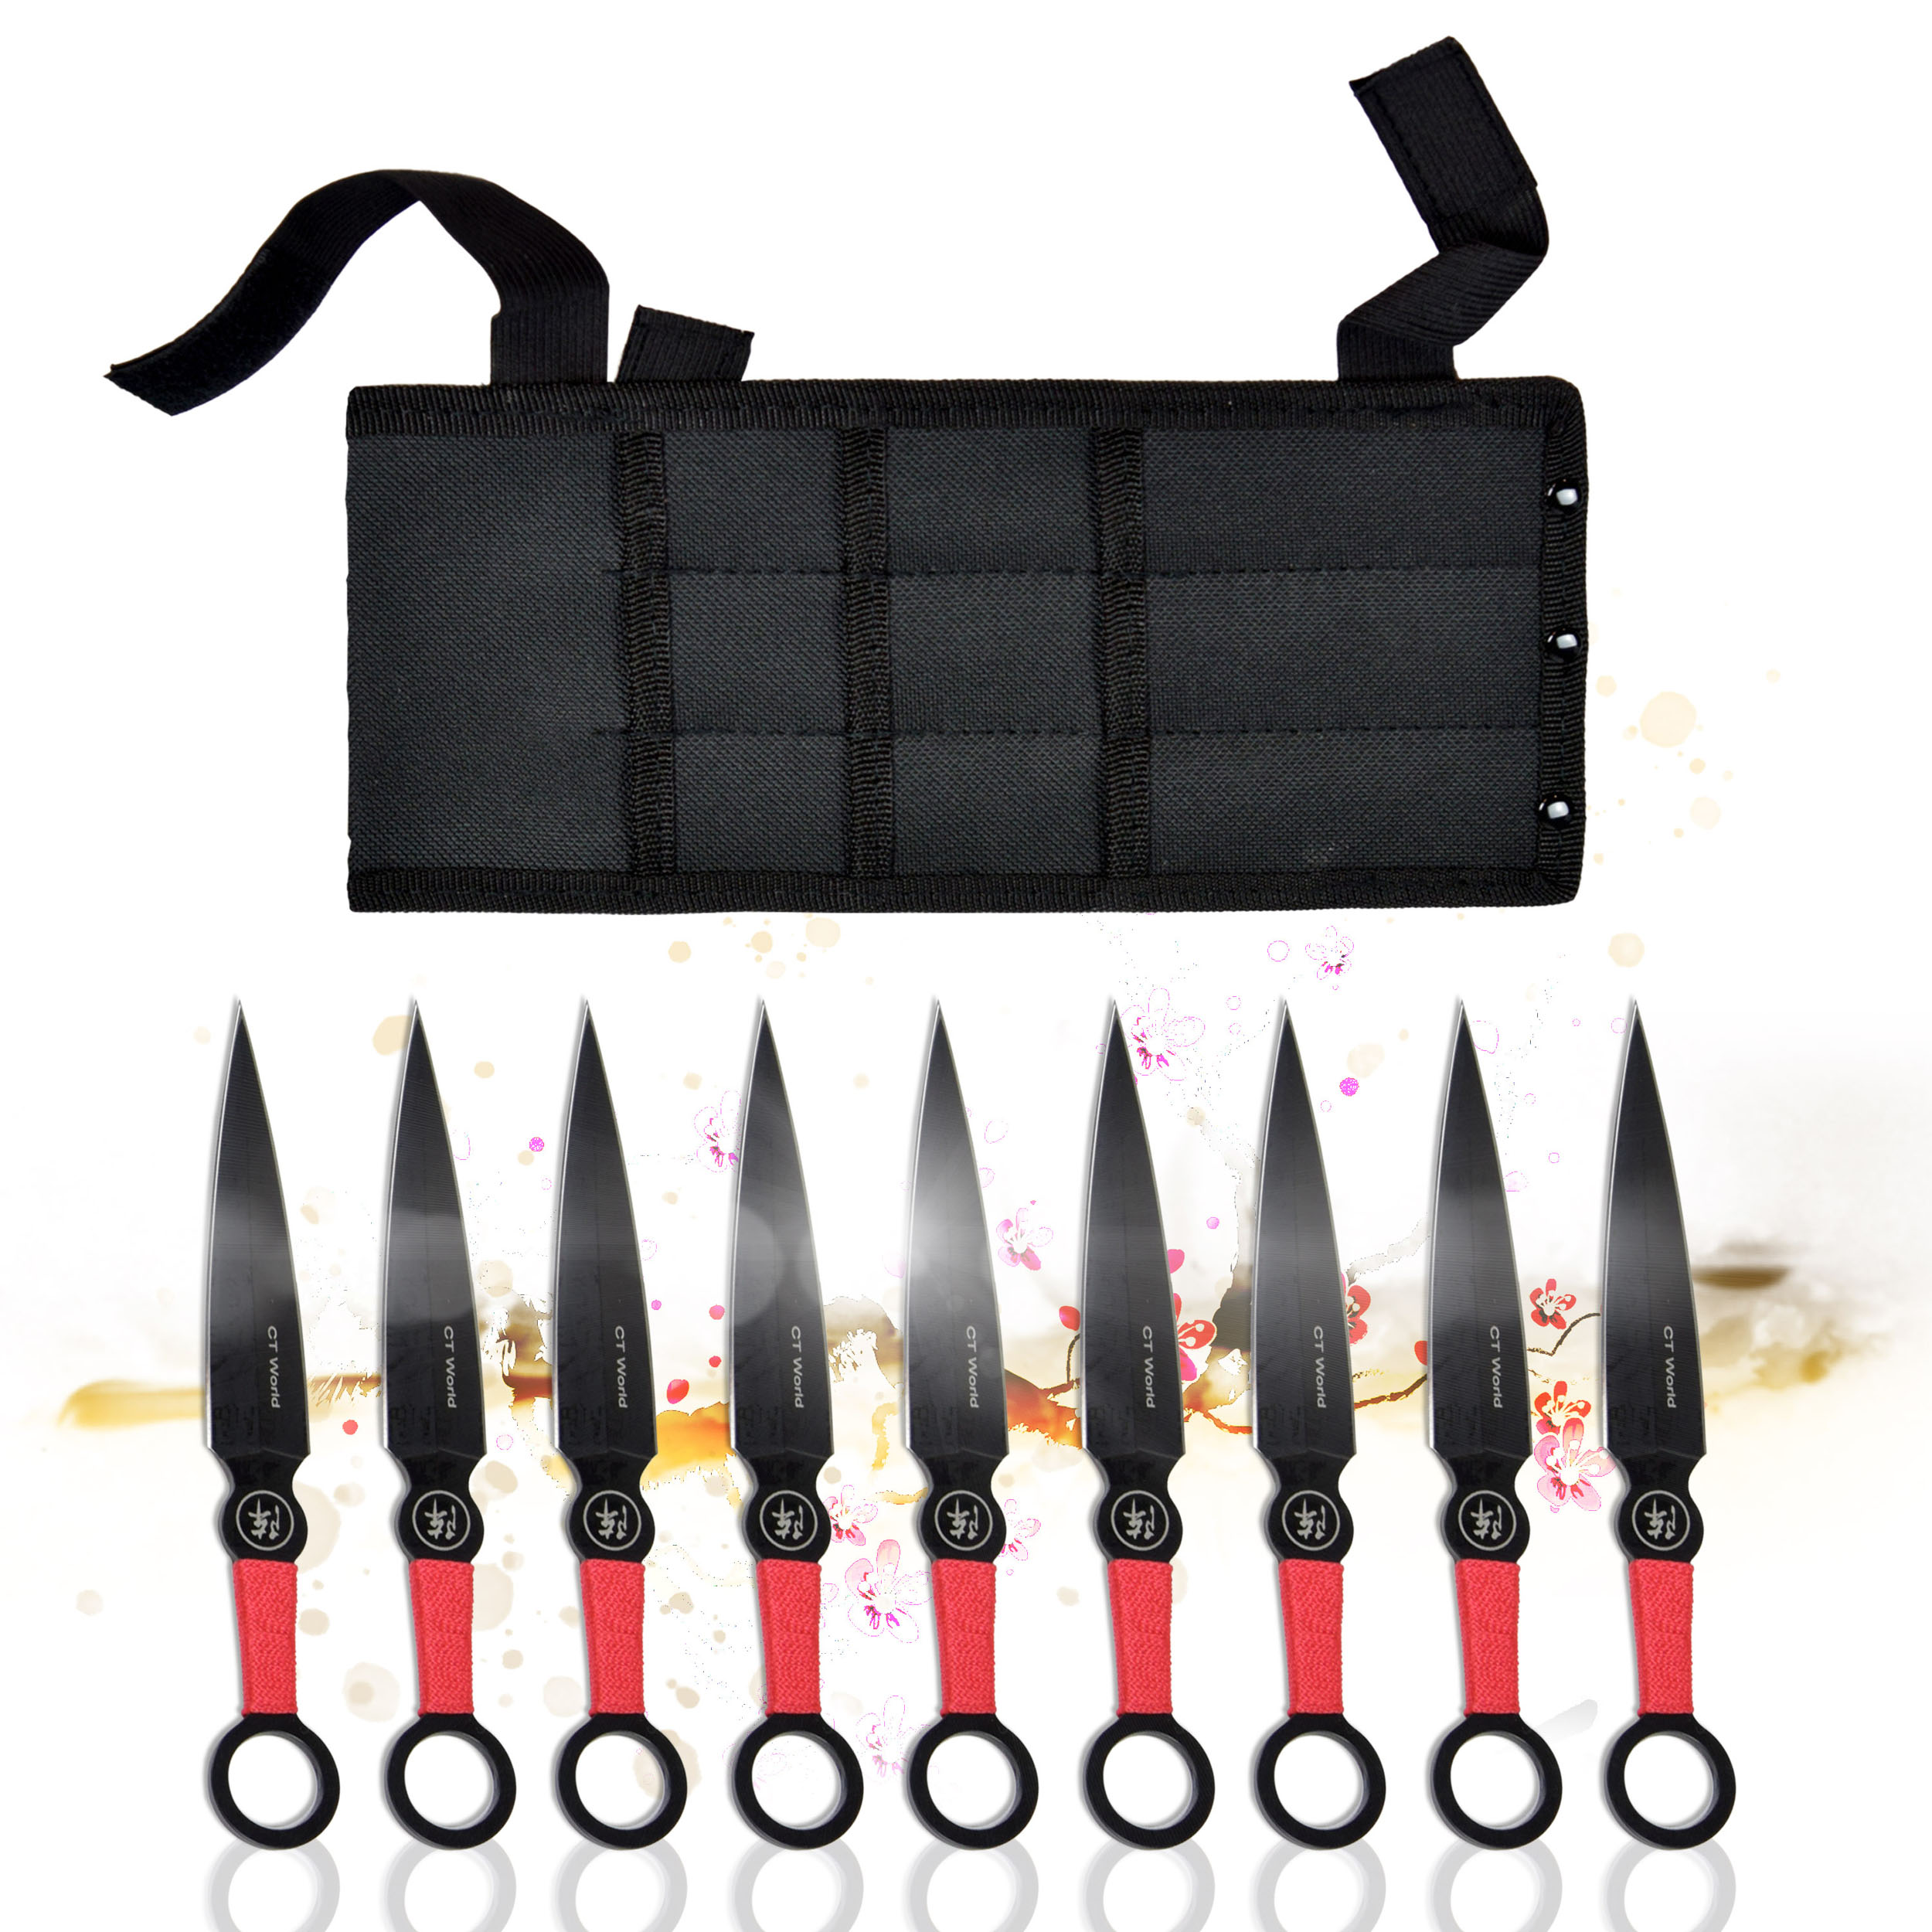 Throwing knife set of 9 with sheath, stainless steel kunai 